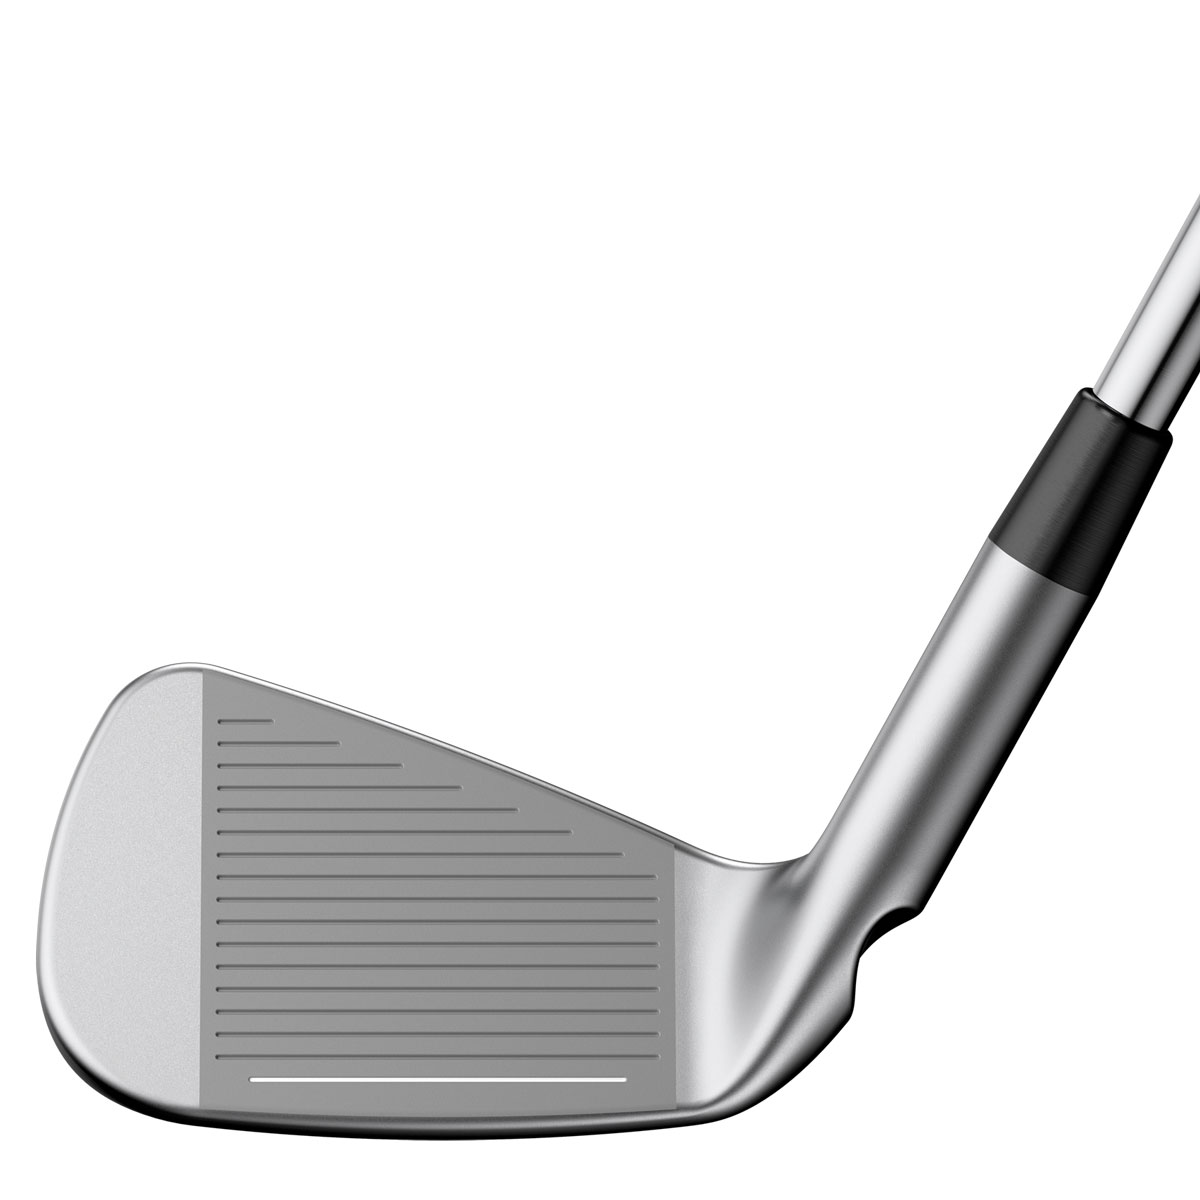 PING i59 Steel Golf Irons - Custom Fit from american golf